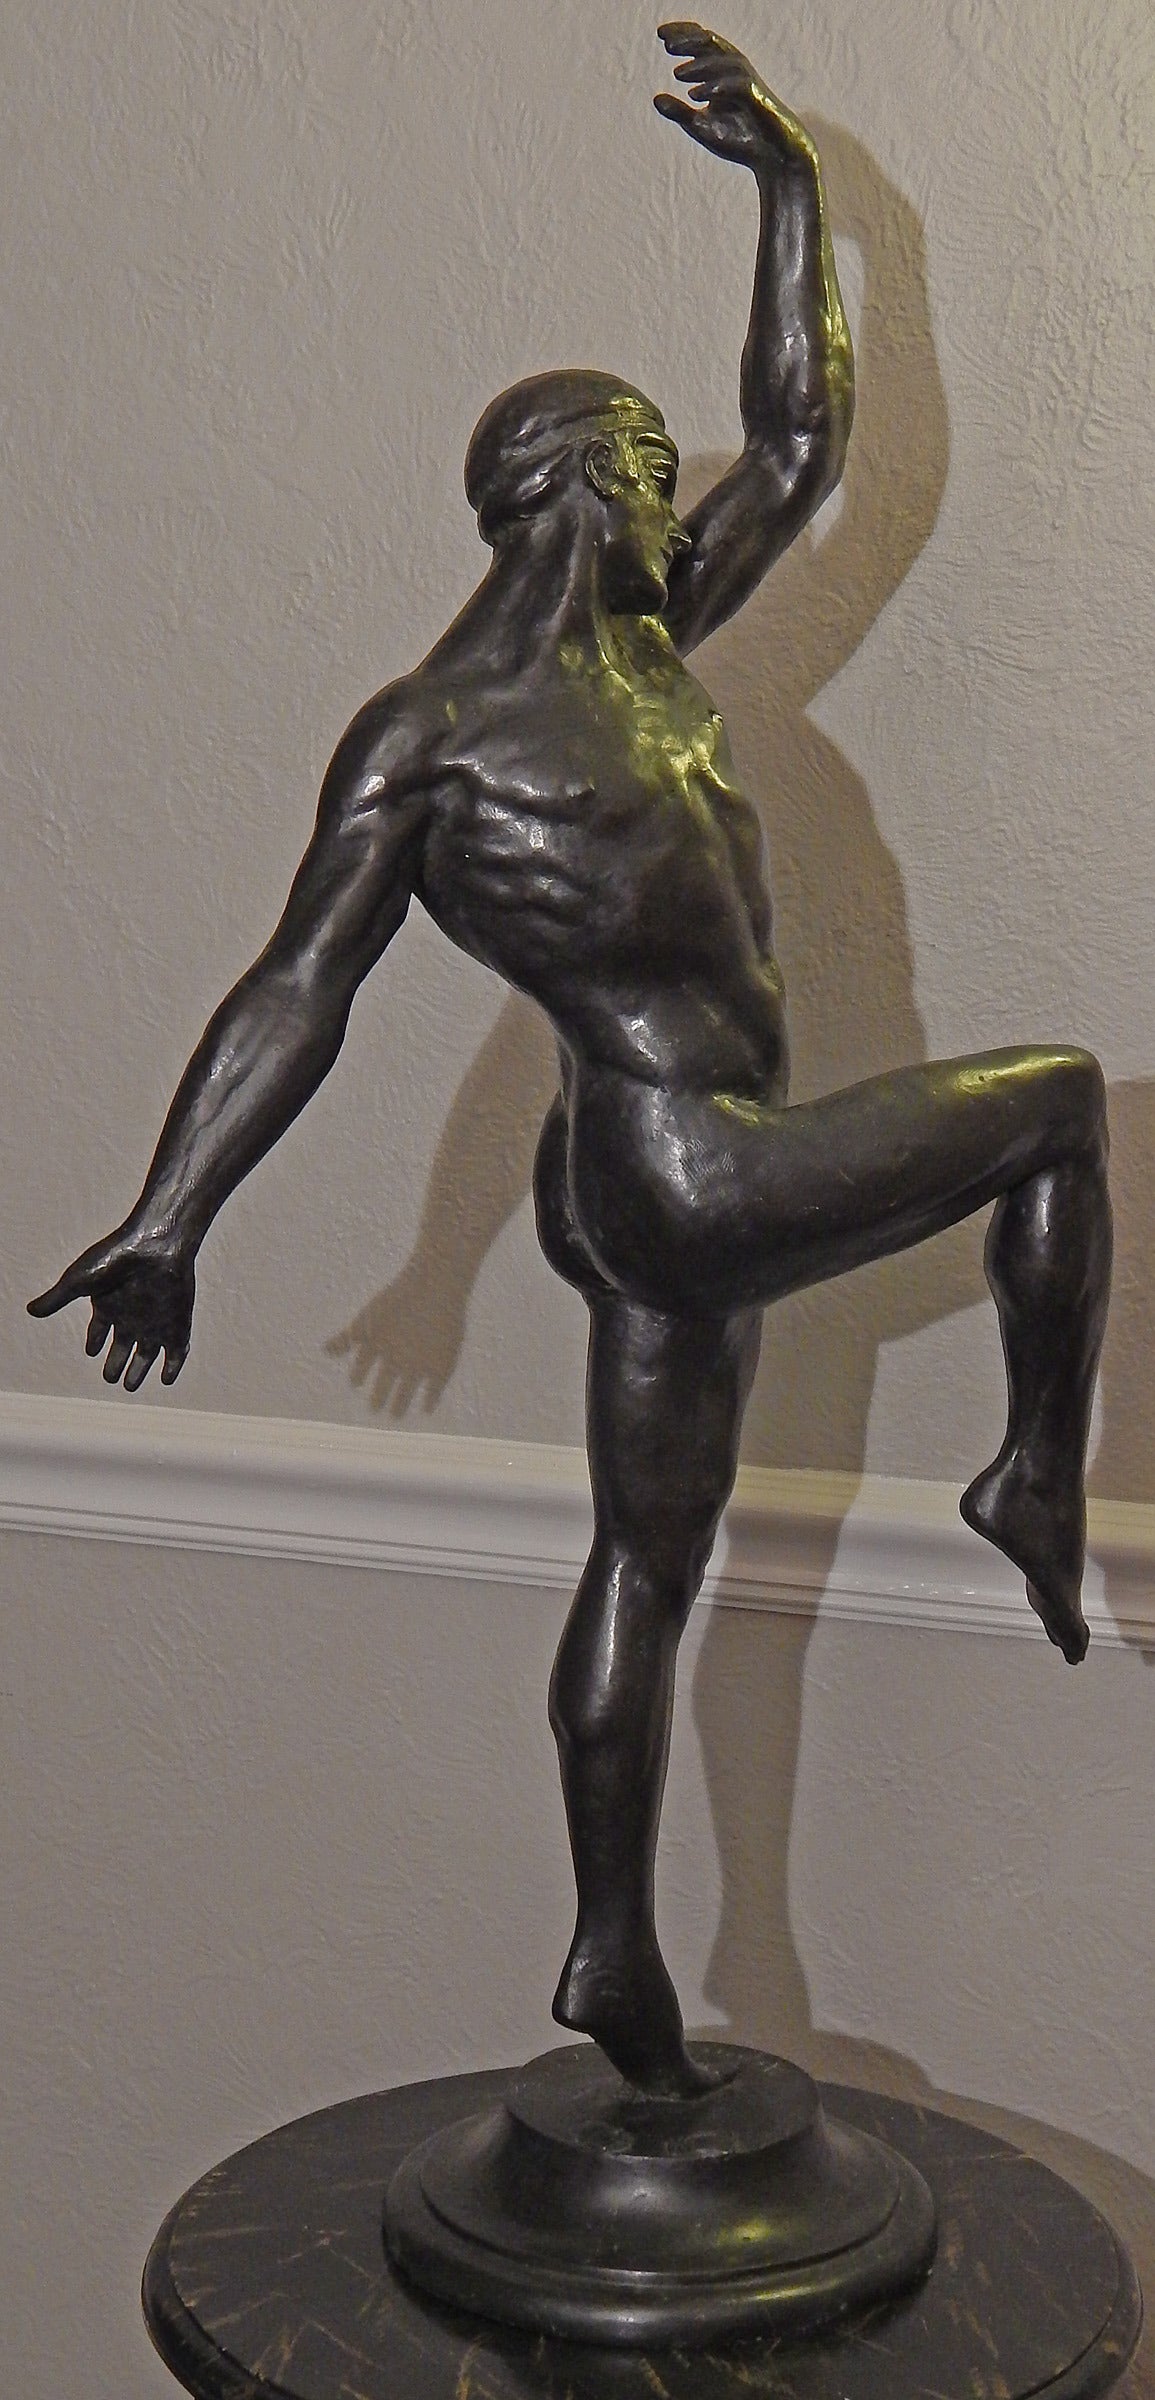 This especially large and rare bronze showing a modern male dancer in a dynamic pose was sculpted by Maurice Guiraud Riviere, one of France’s leading sculptors in the 1920s and 1930s. Riviere specialized in depicting figures posed in a stylized